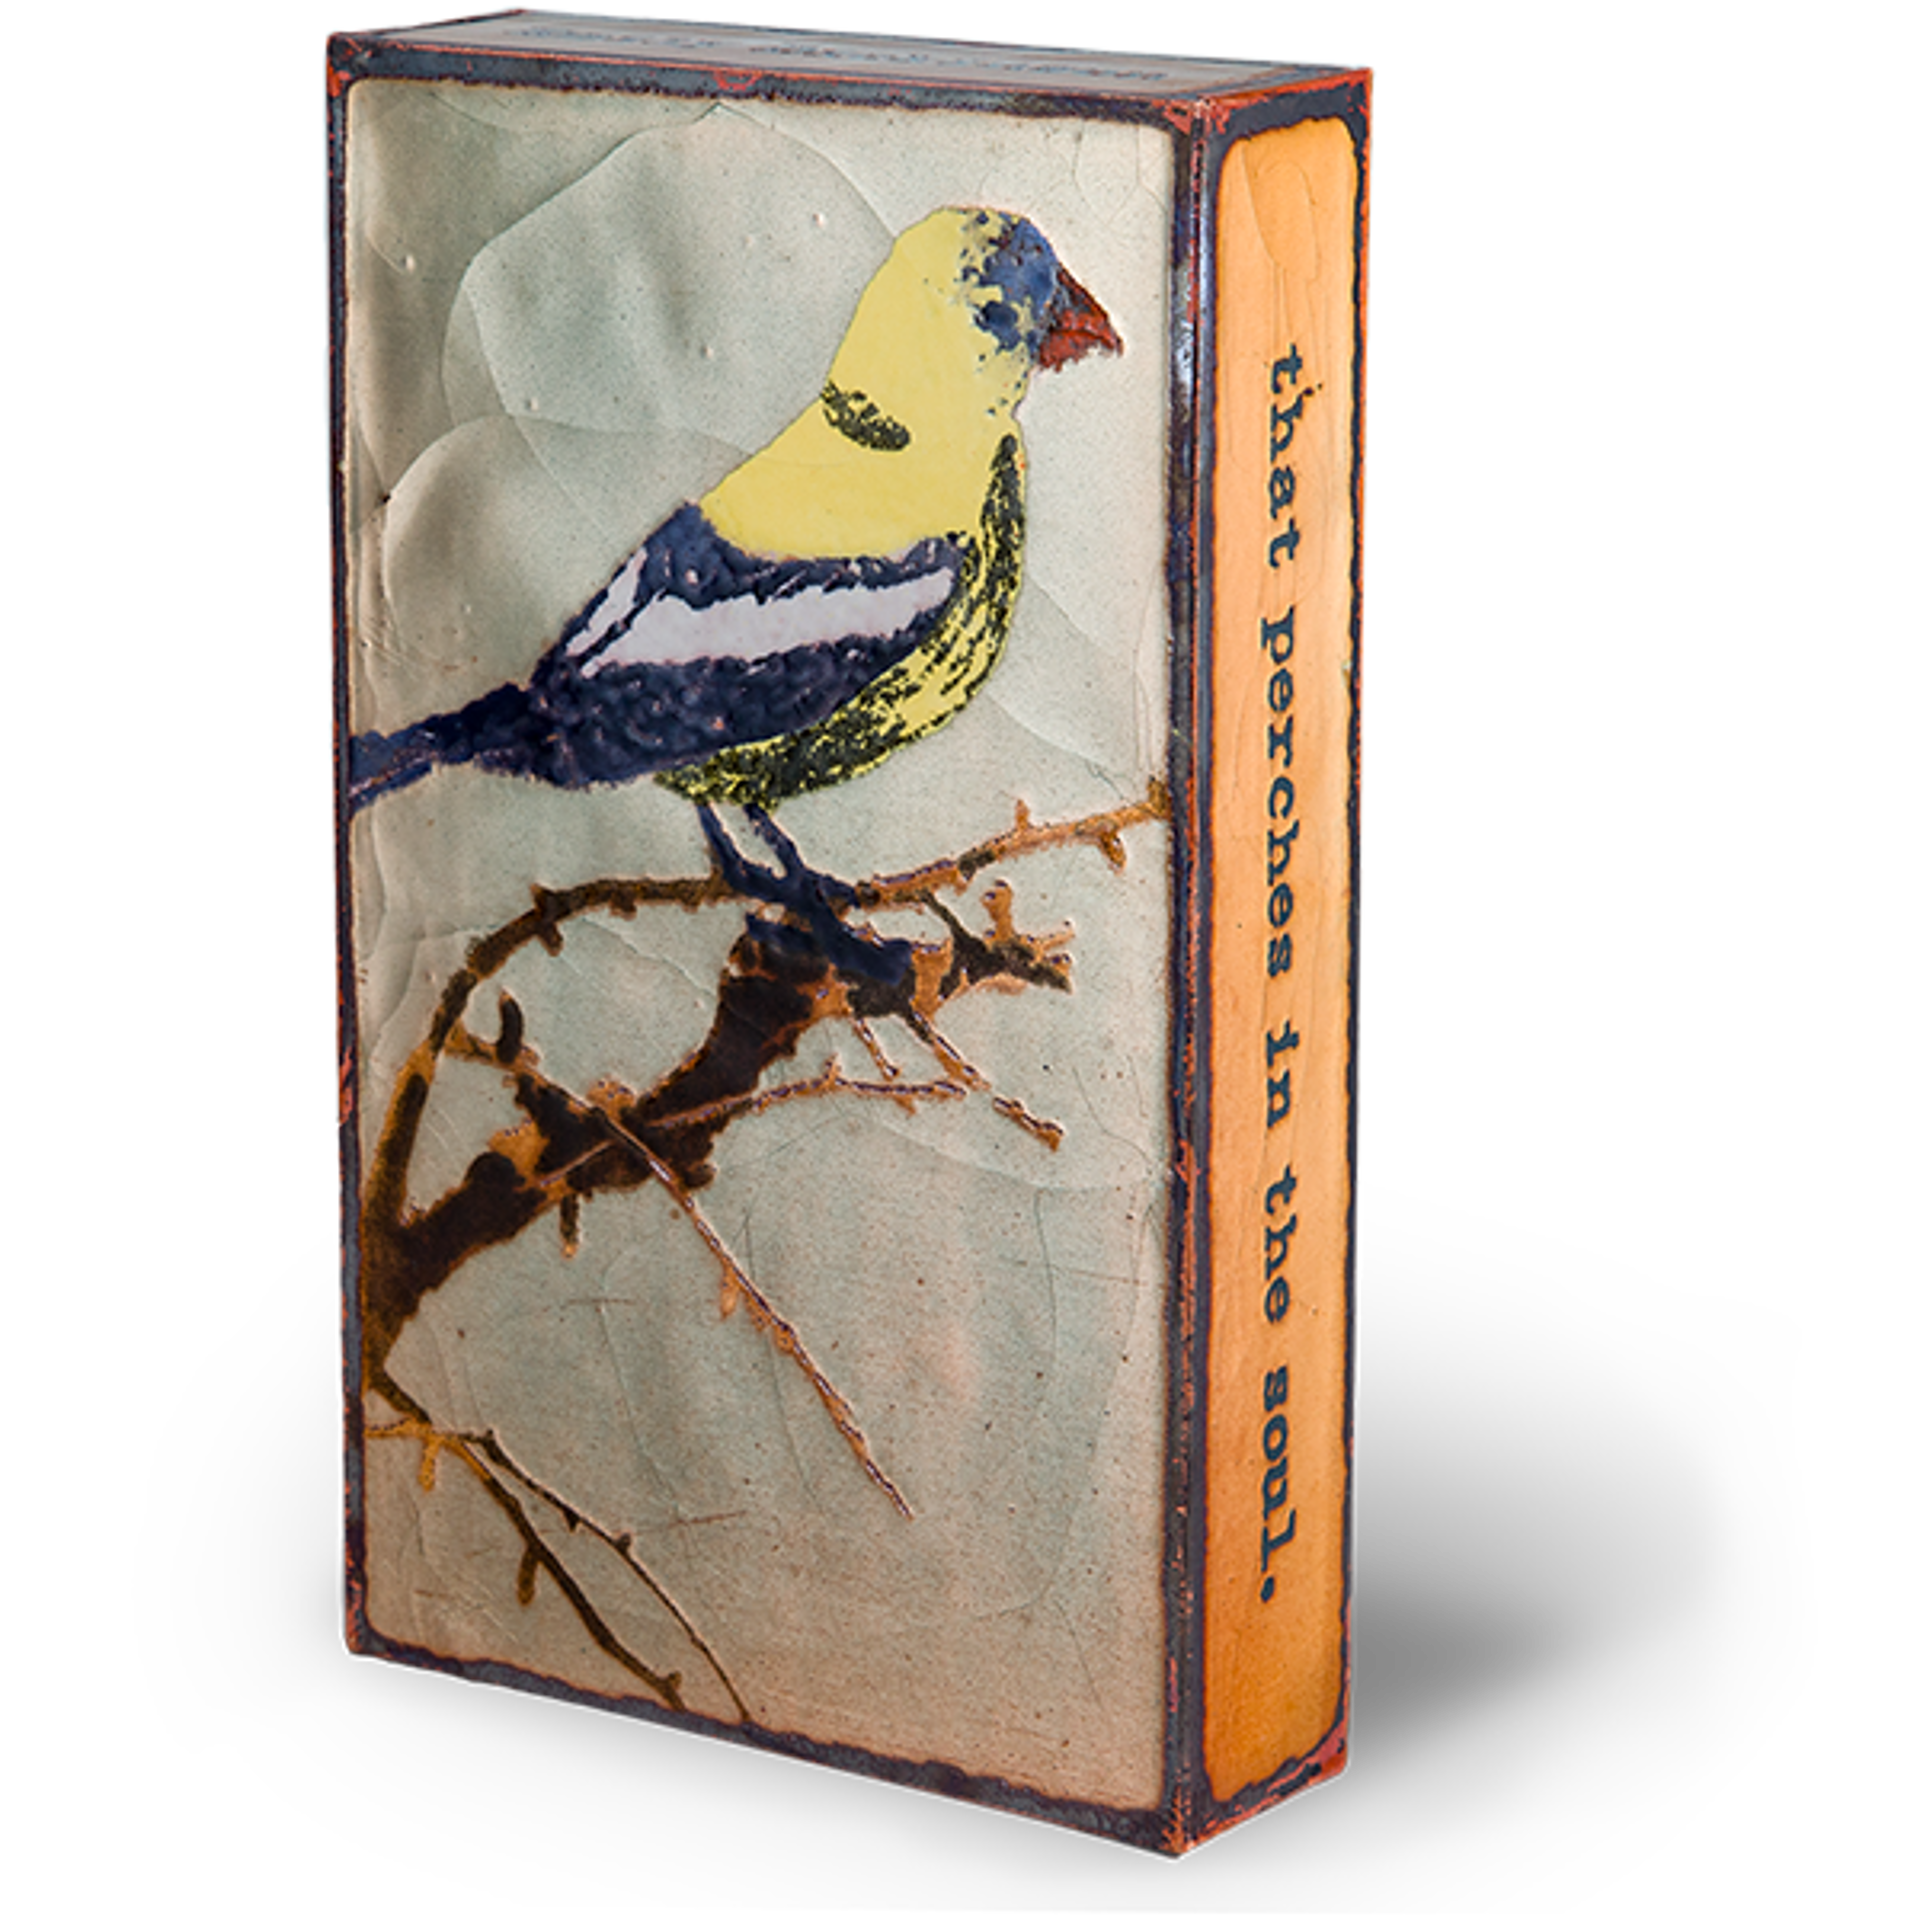 Alight (Retired Tile) "Hope is the thing with feathers that perches in the soul." - Emily Dickinson by Houston Llew